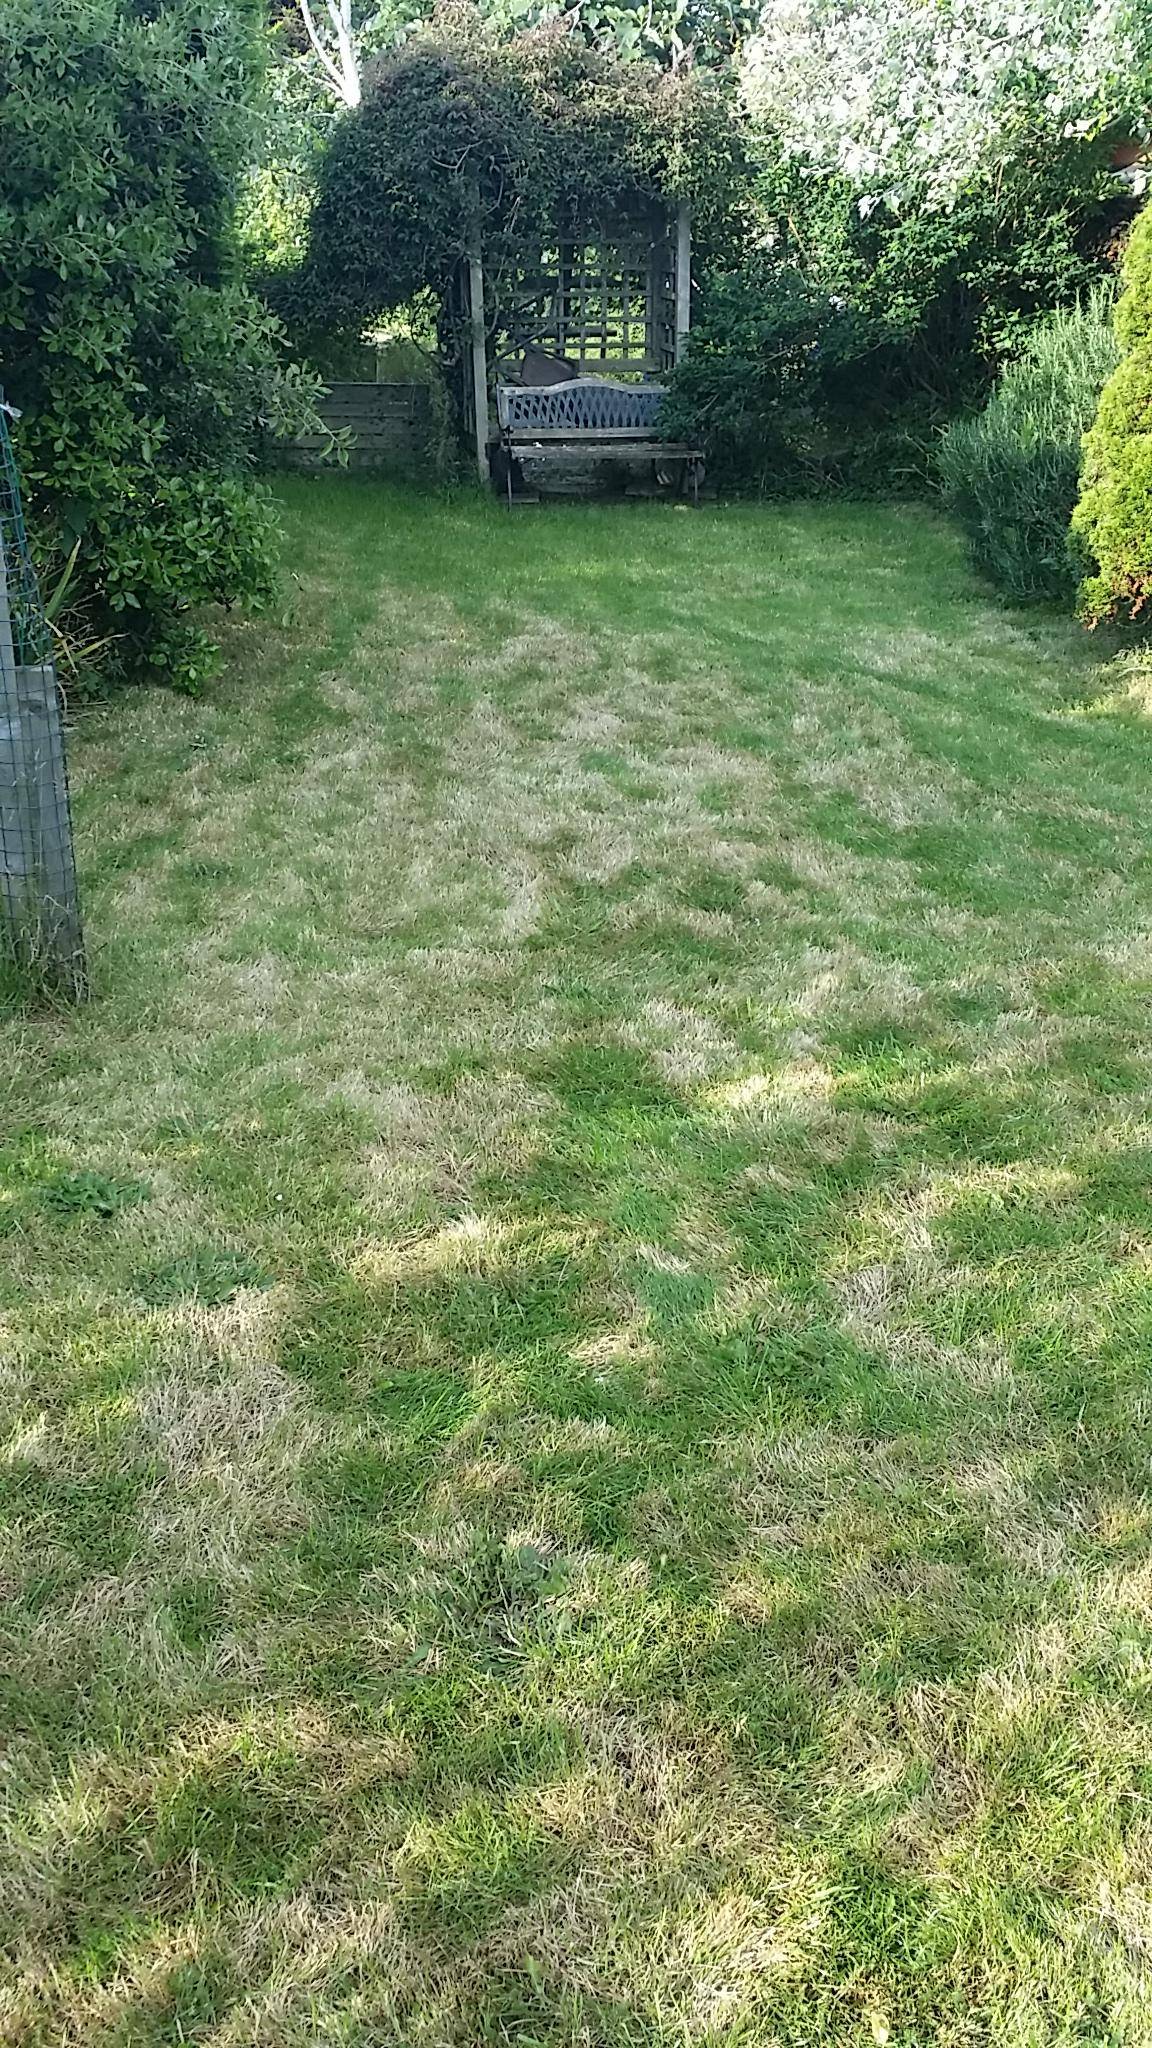 How to cure brown lawn. Grass stalks look too long - Gardening ...